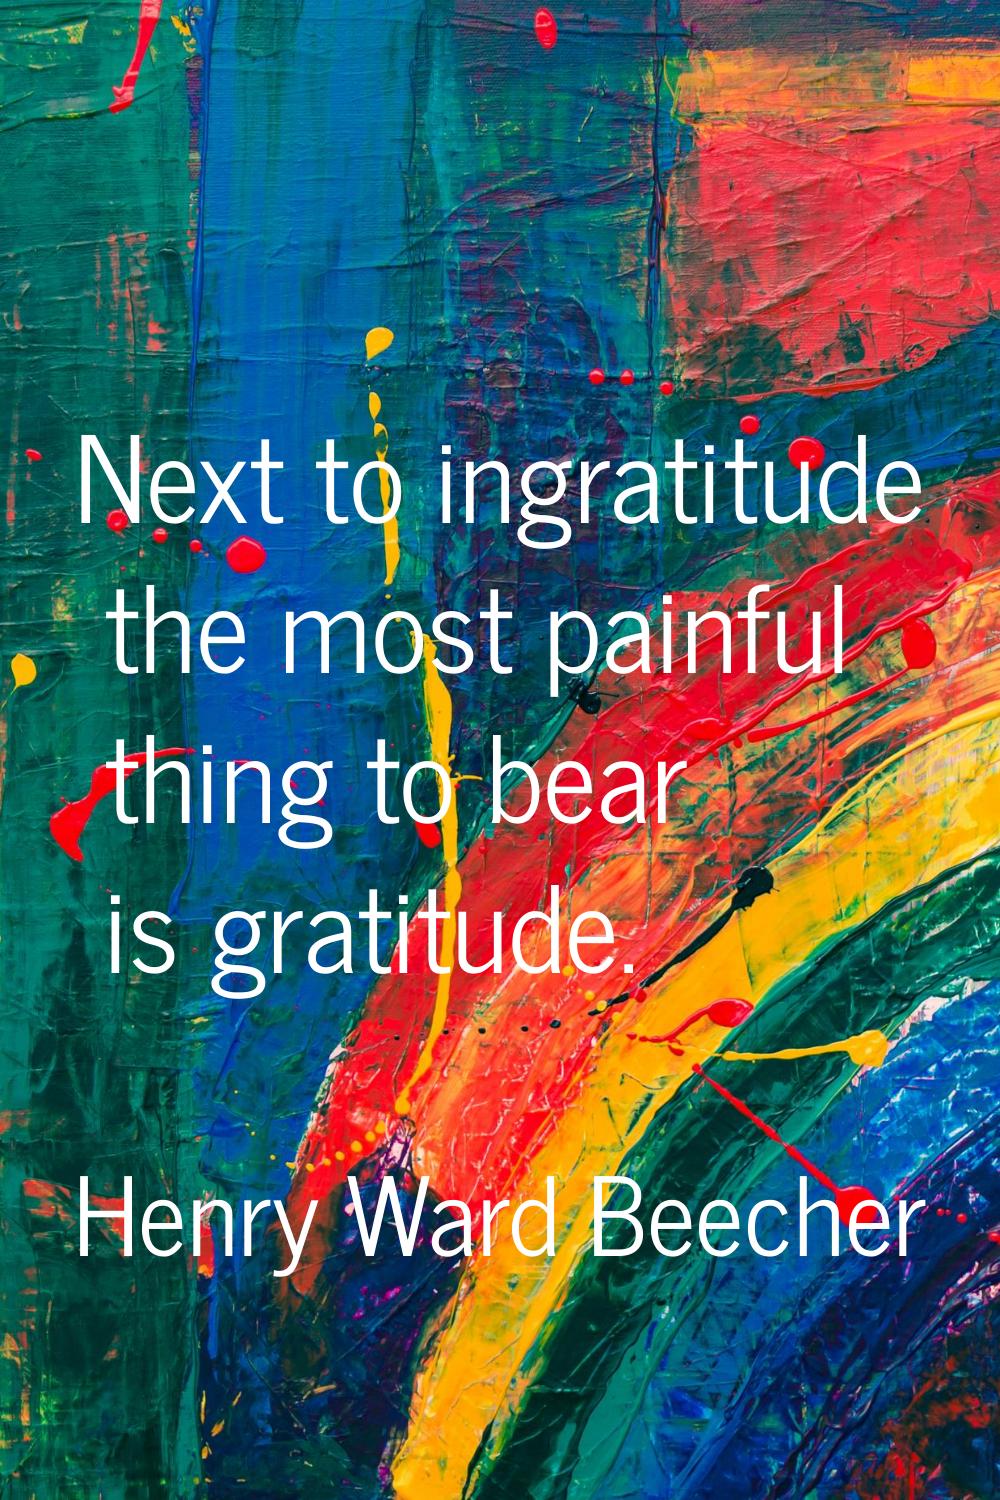 Next to ingratitude the most painful thing to bear is gratitude.